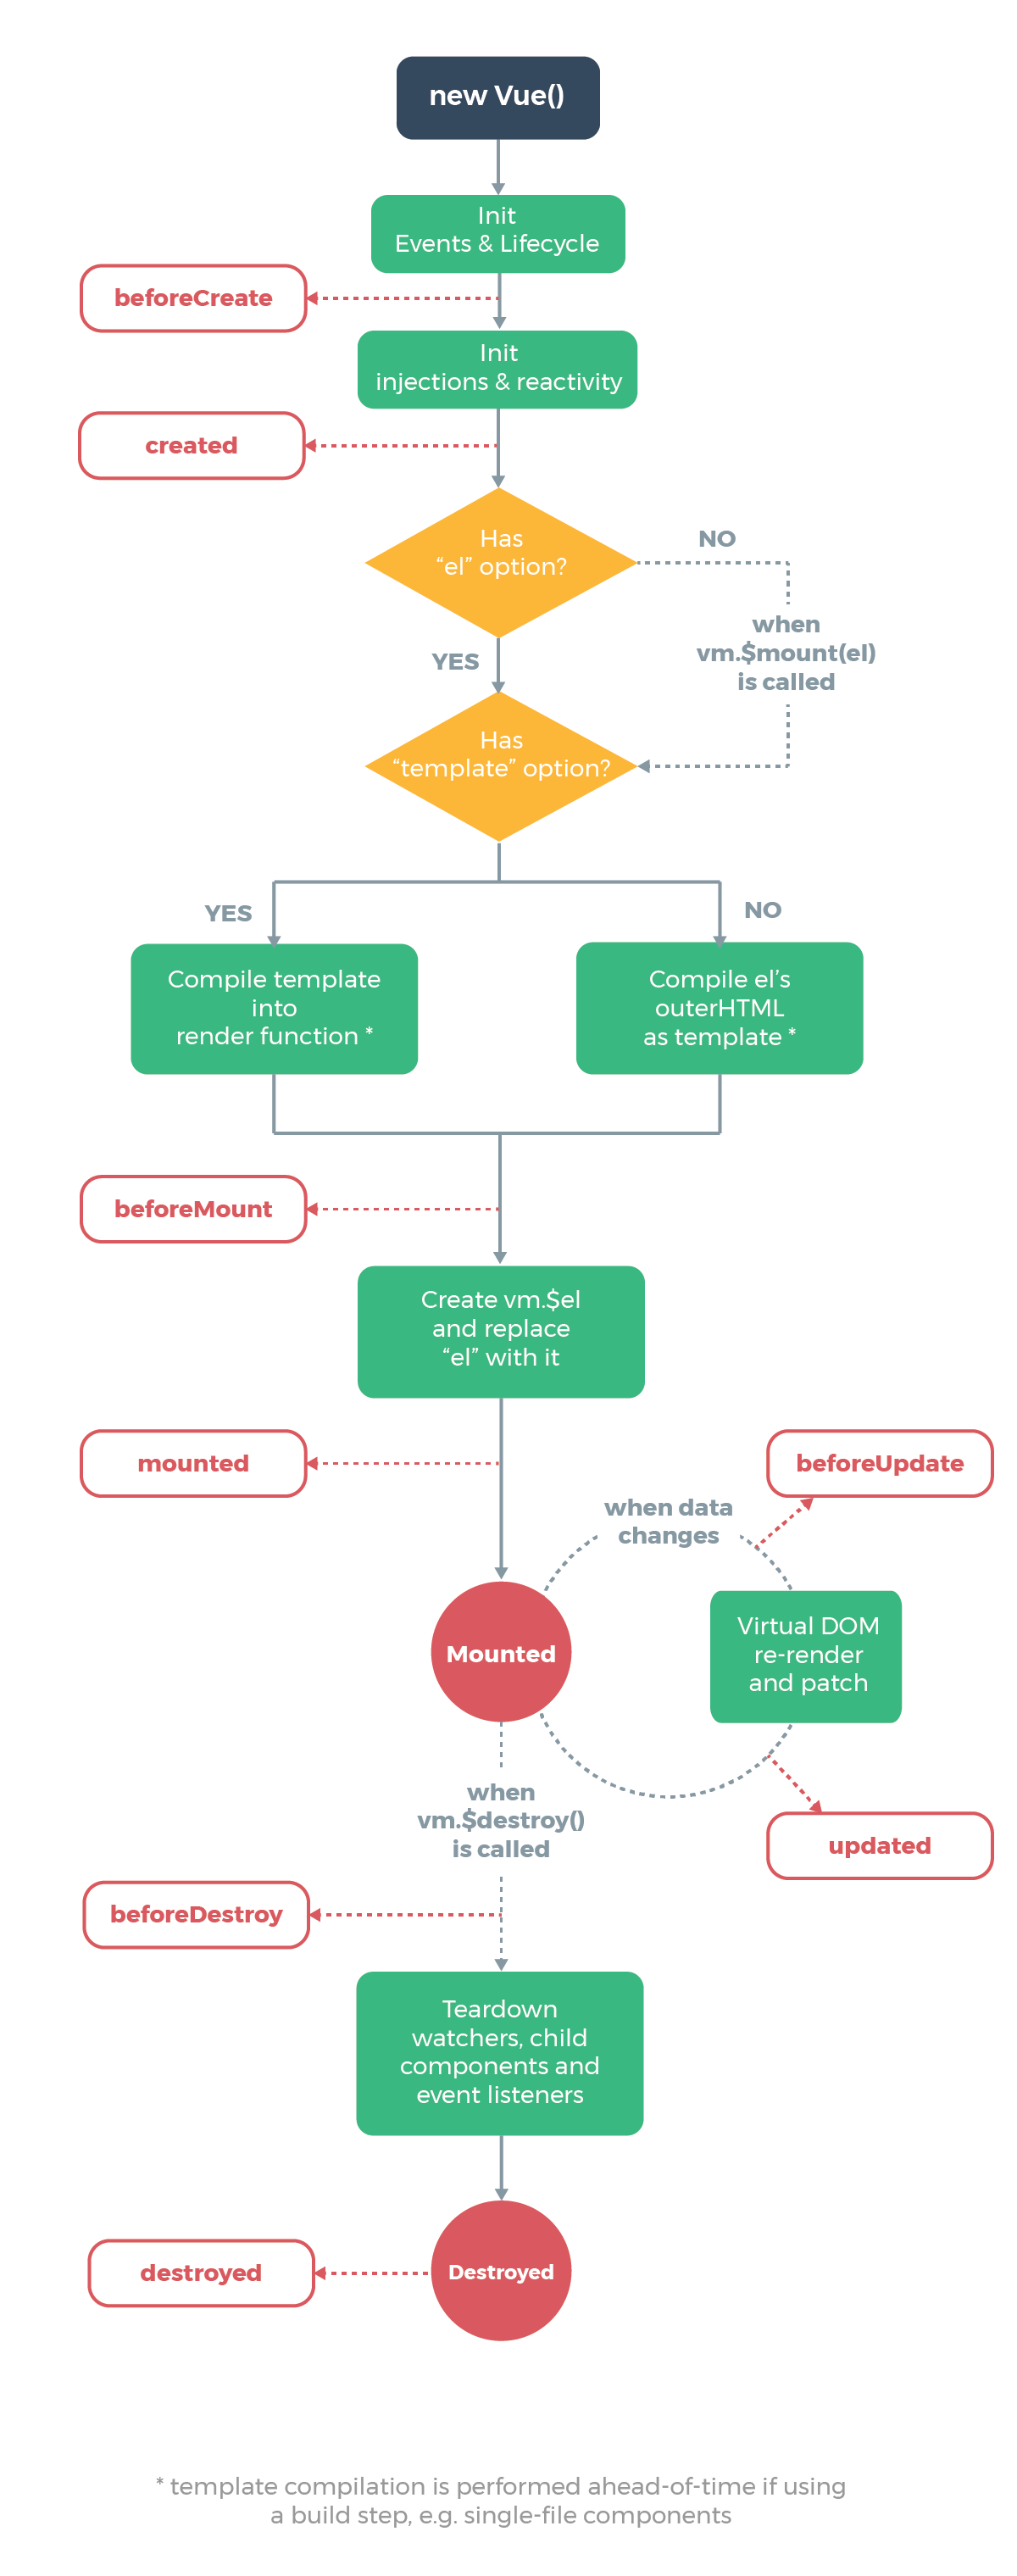 https://cn.vuejs.org/images/lifecycle.png